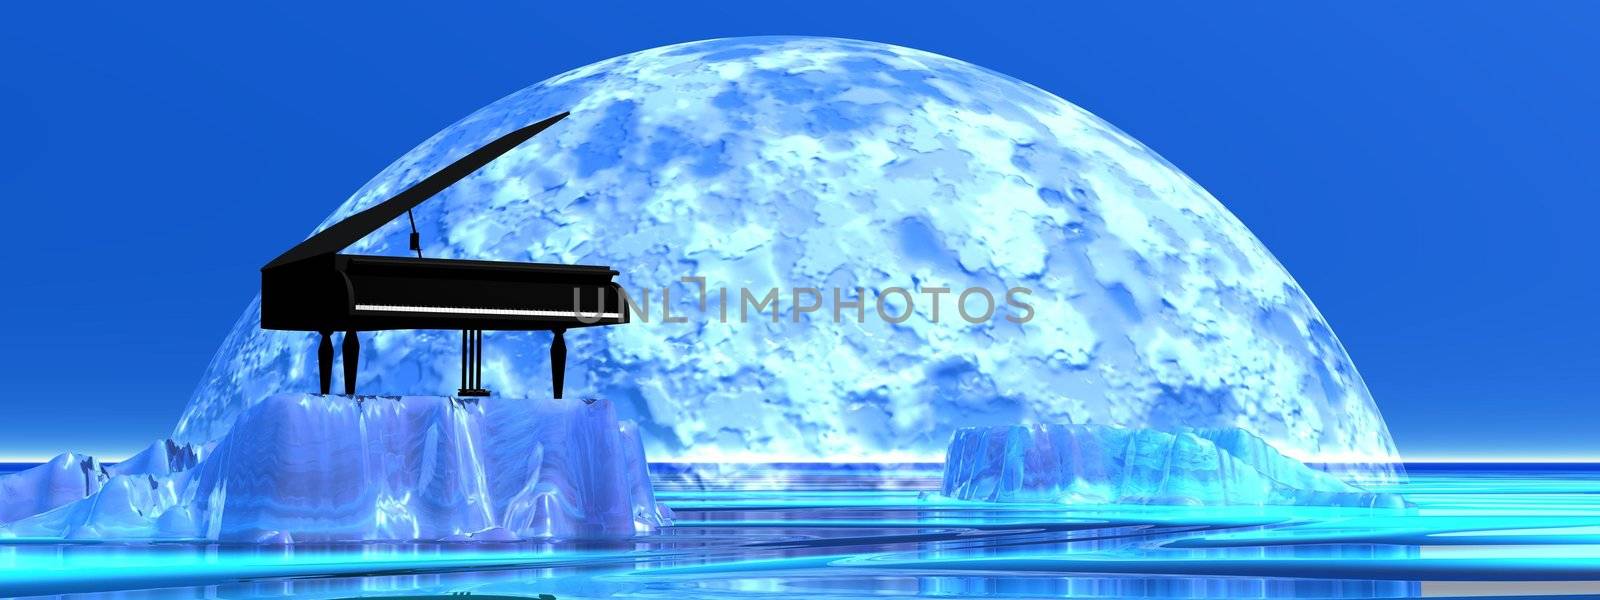 Piano standing on a iceberg in front of the moonlight